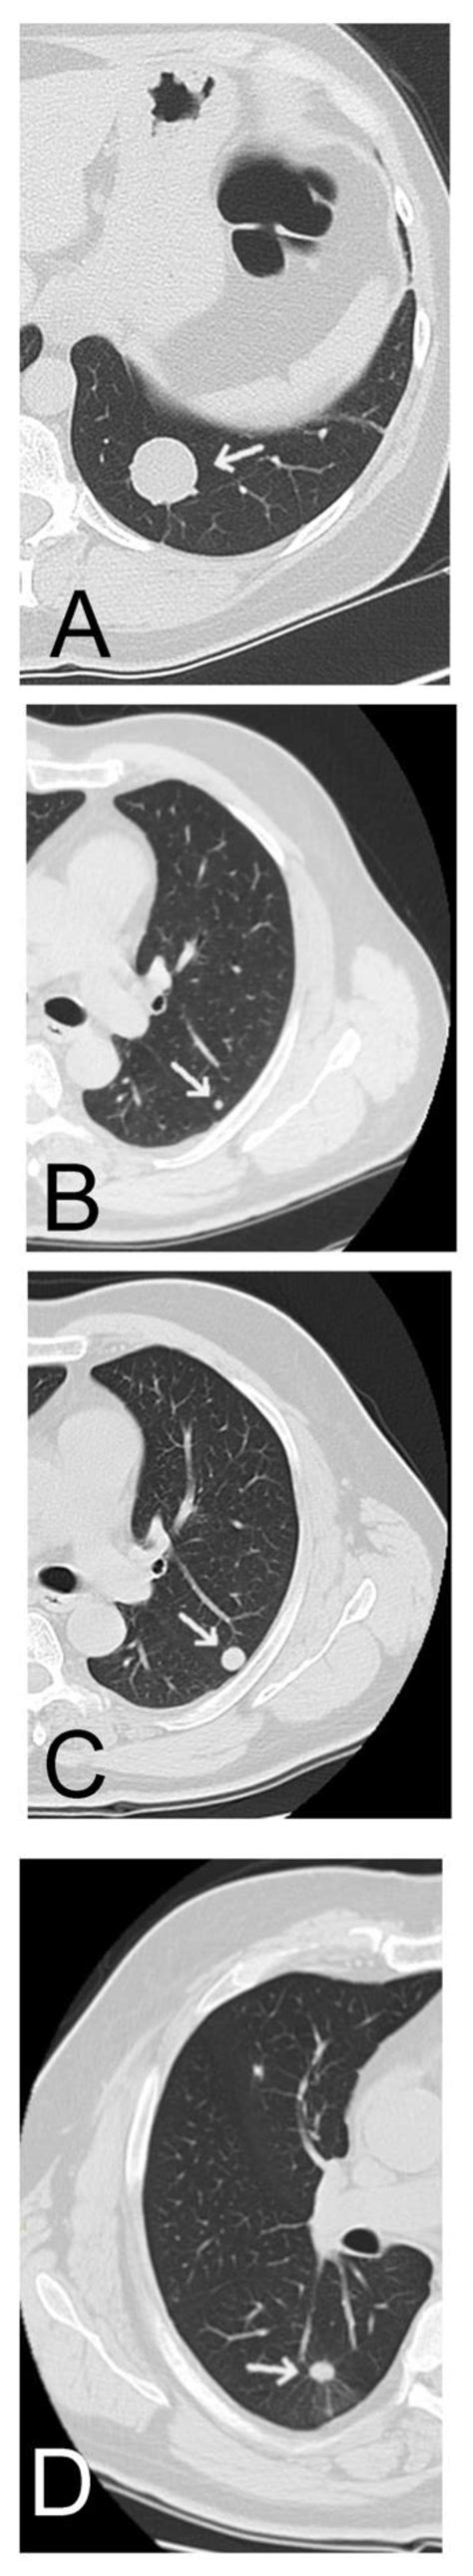 jcm free full text clinical and radiologic features together better predict lung nodule